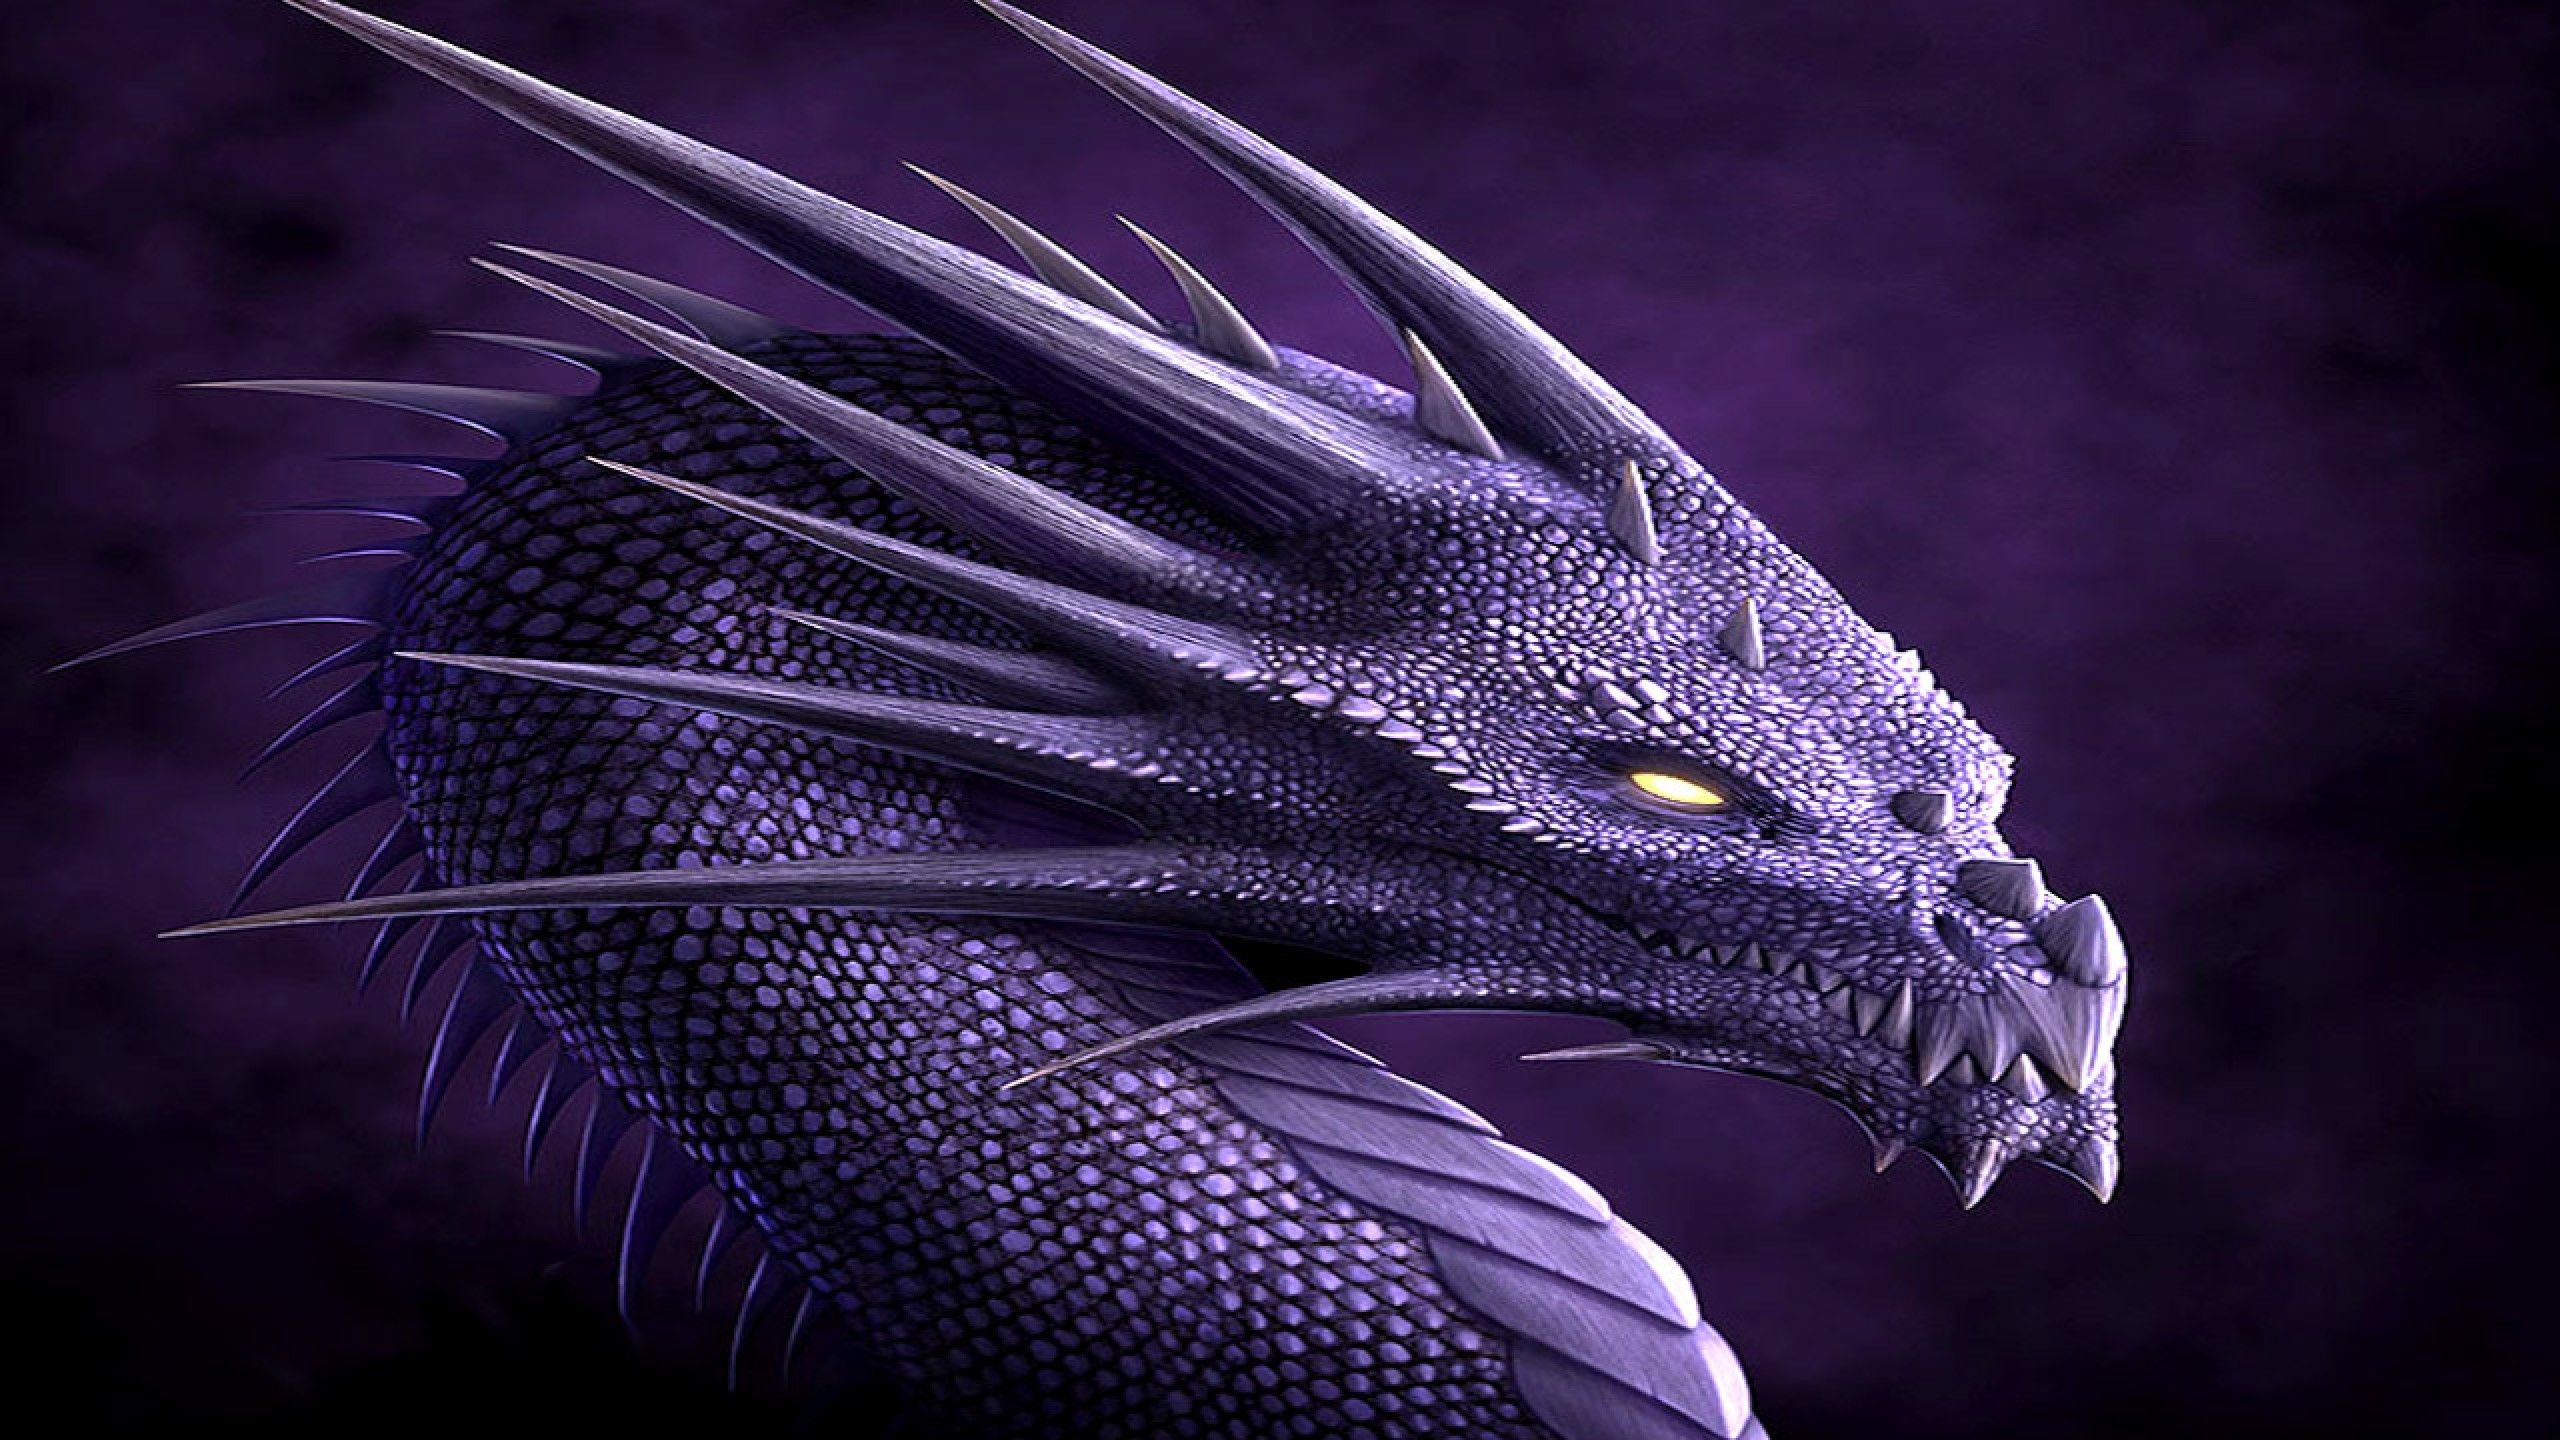 2560x1440 Wallpapers For Blue Dragon Wallpaper Hd 1080p 